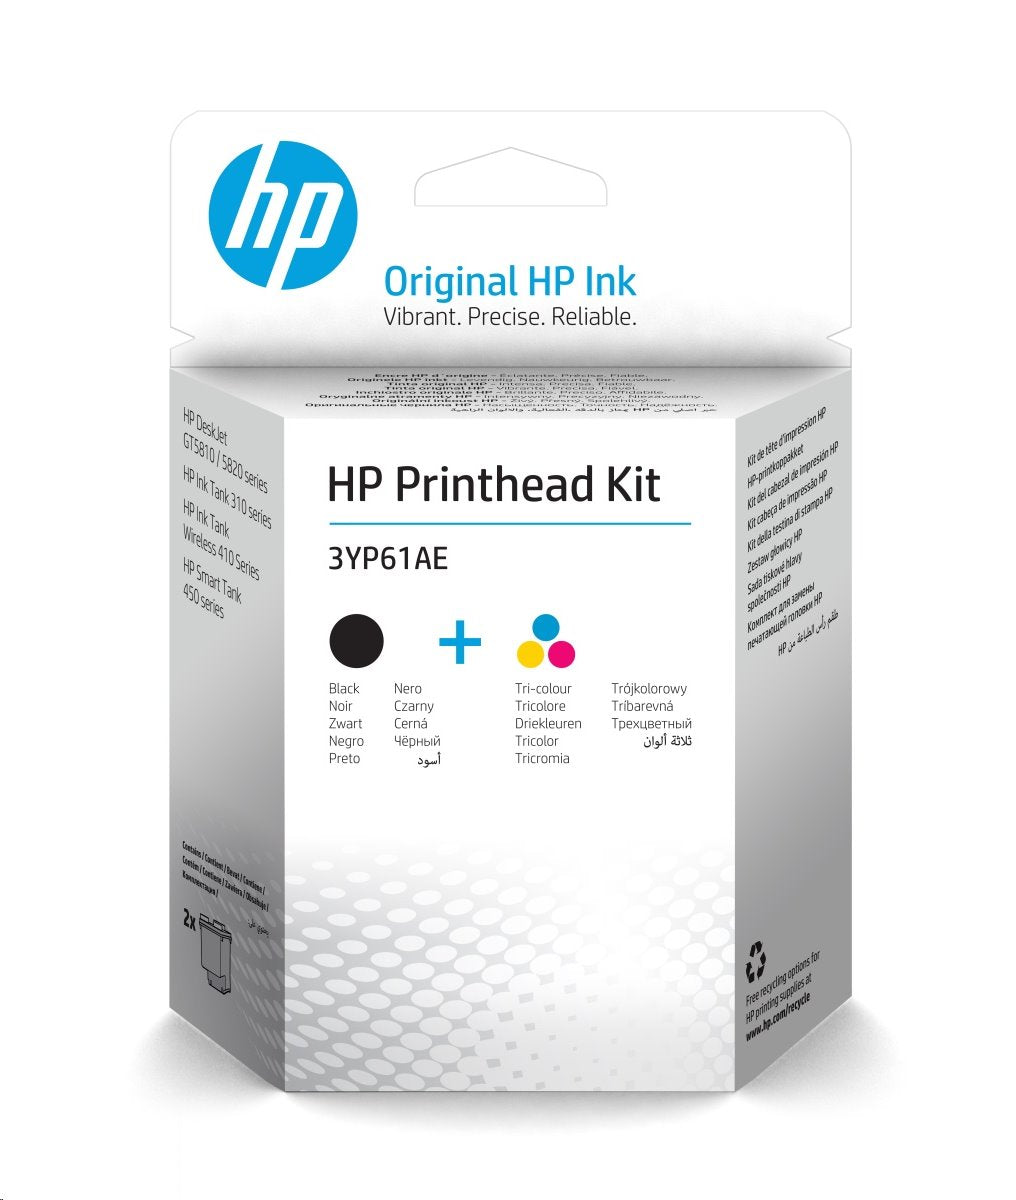 HP  Printhead Cartridge   Black and Tricolor Kit for HP GT5810 5820 Tank310 311 318 410 411 418 419  Ink Tank Printers